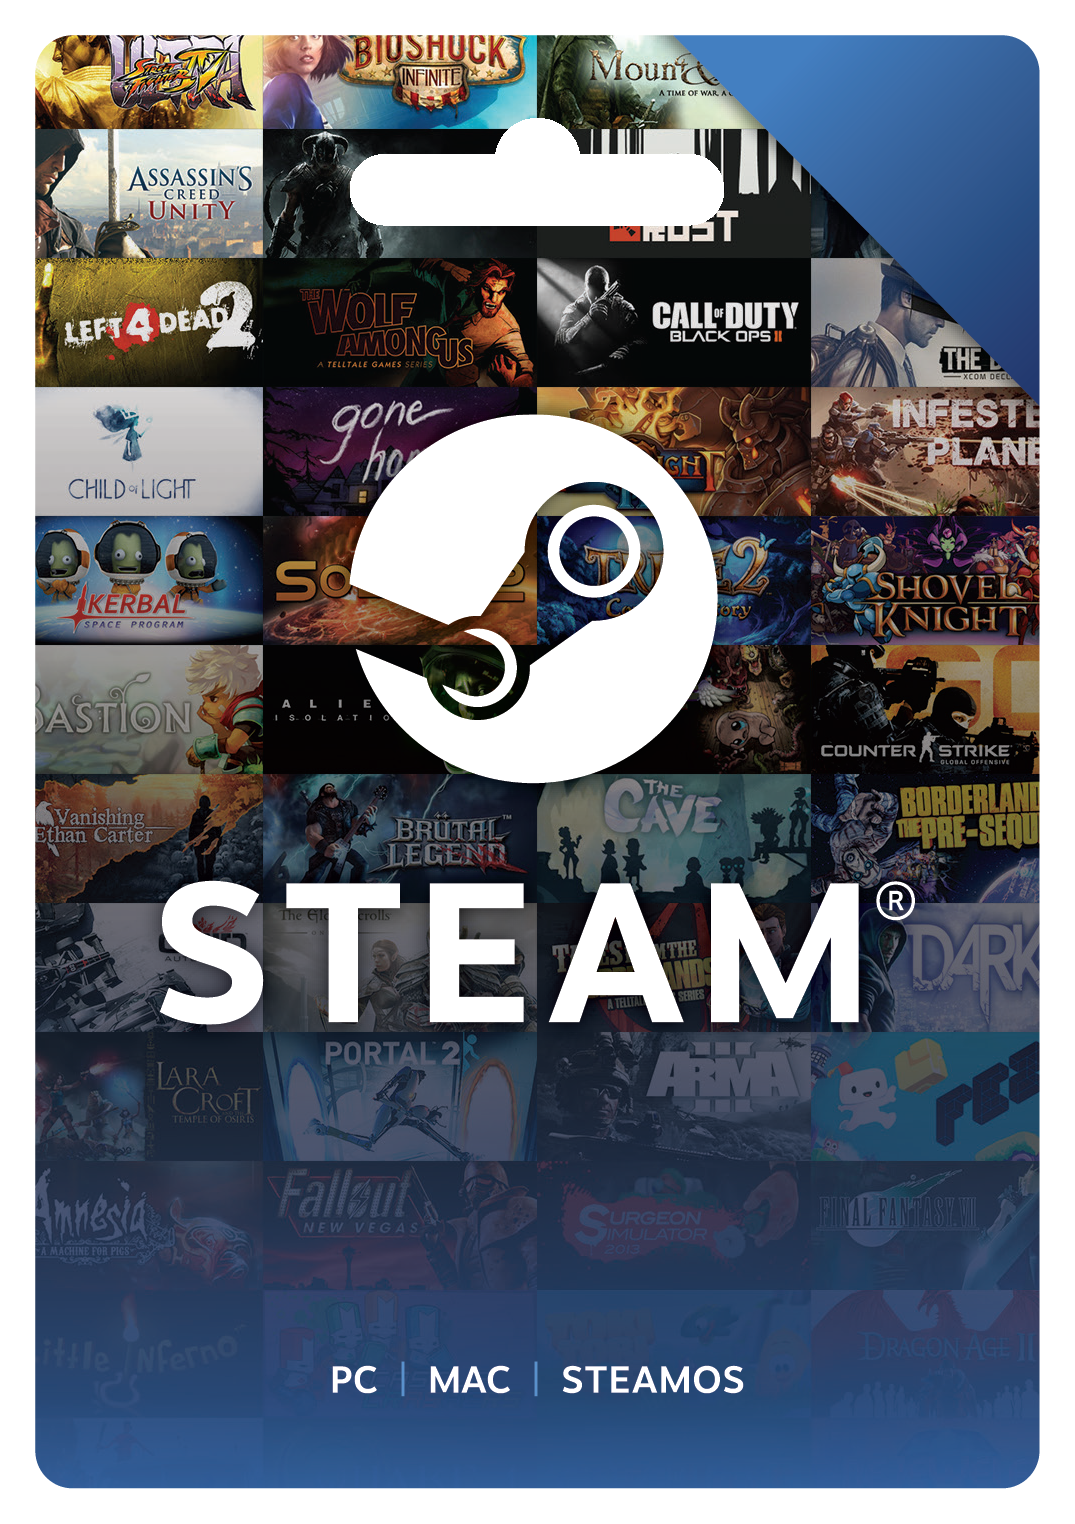 What Are Steam Card Scams? How Can You Avoid Them?